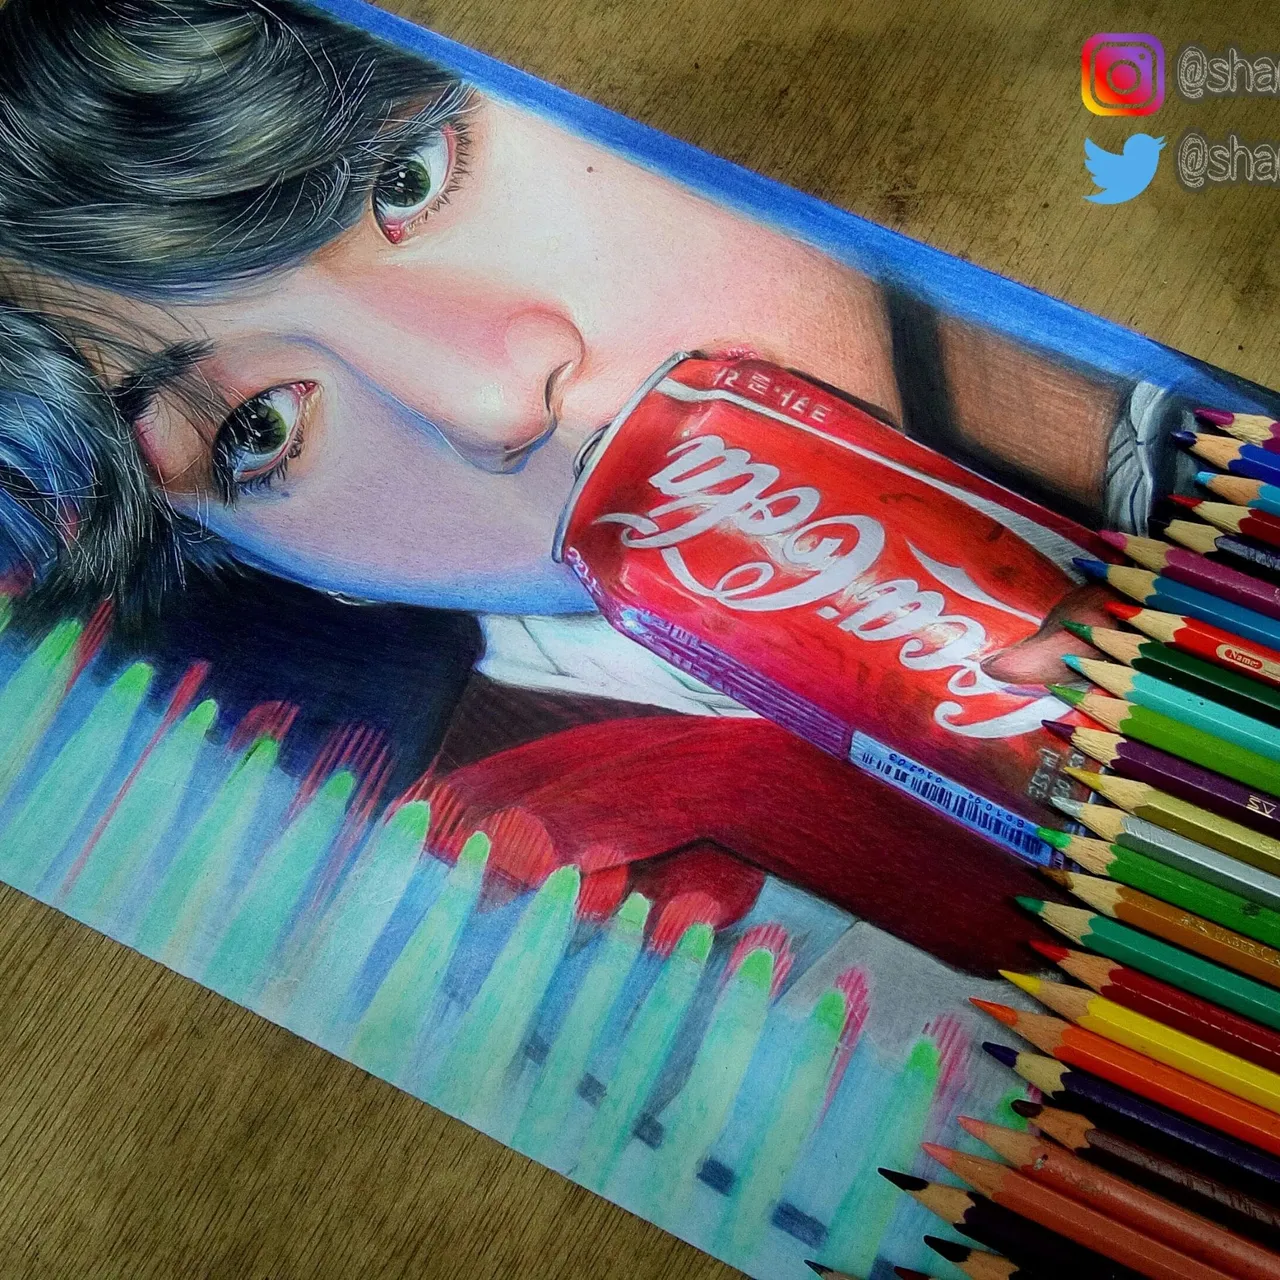 Kim taehyung drawing 😝(give me tips about how i can improve my drawings) |  BTS Amino